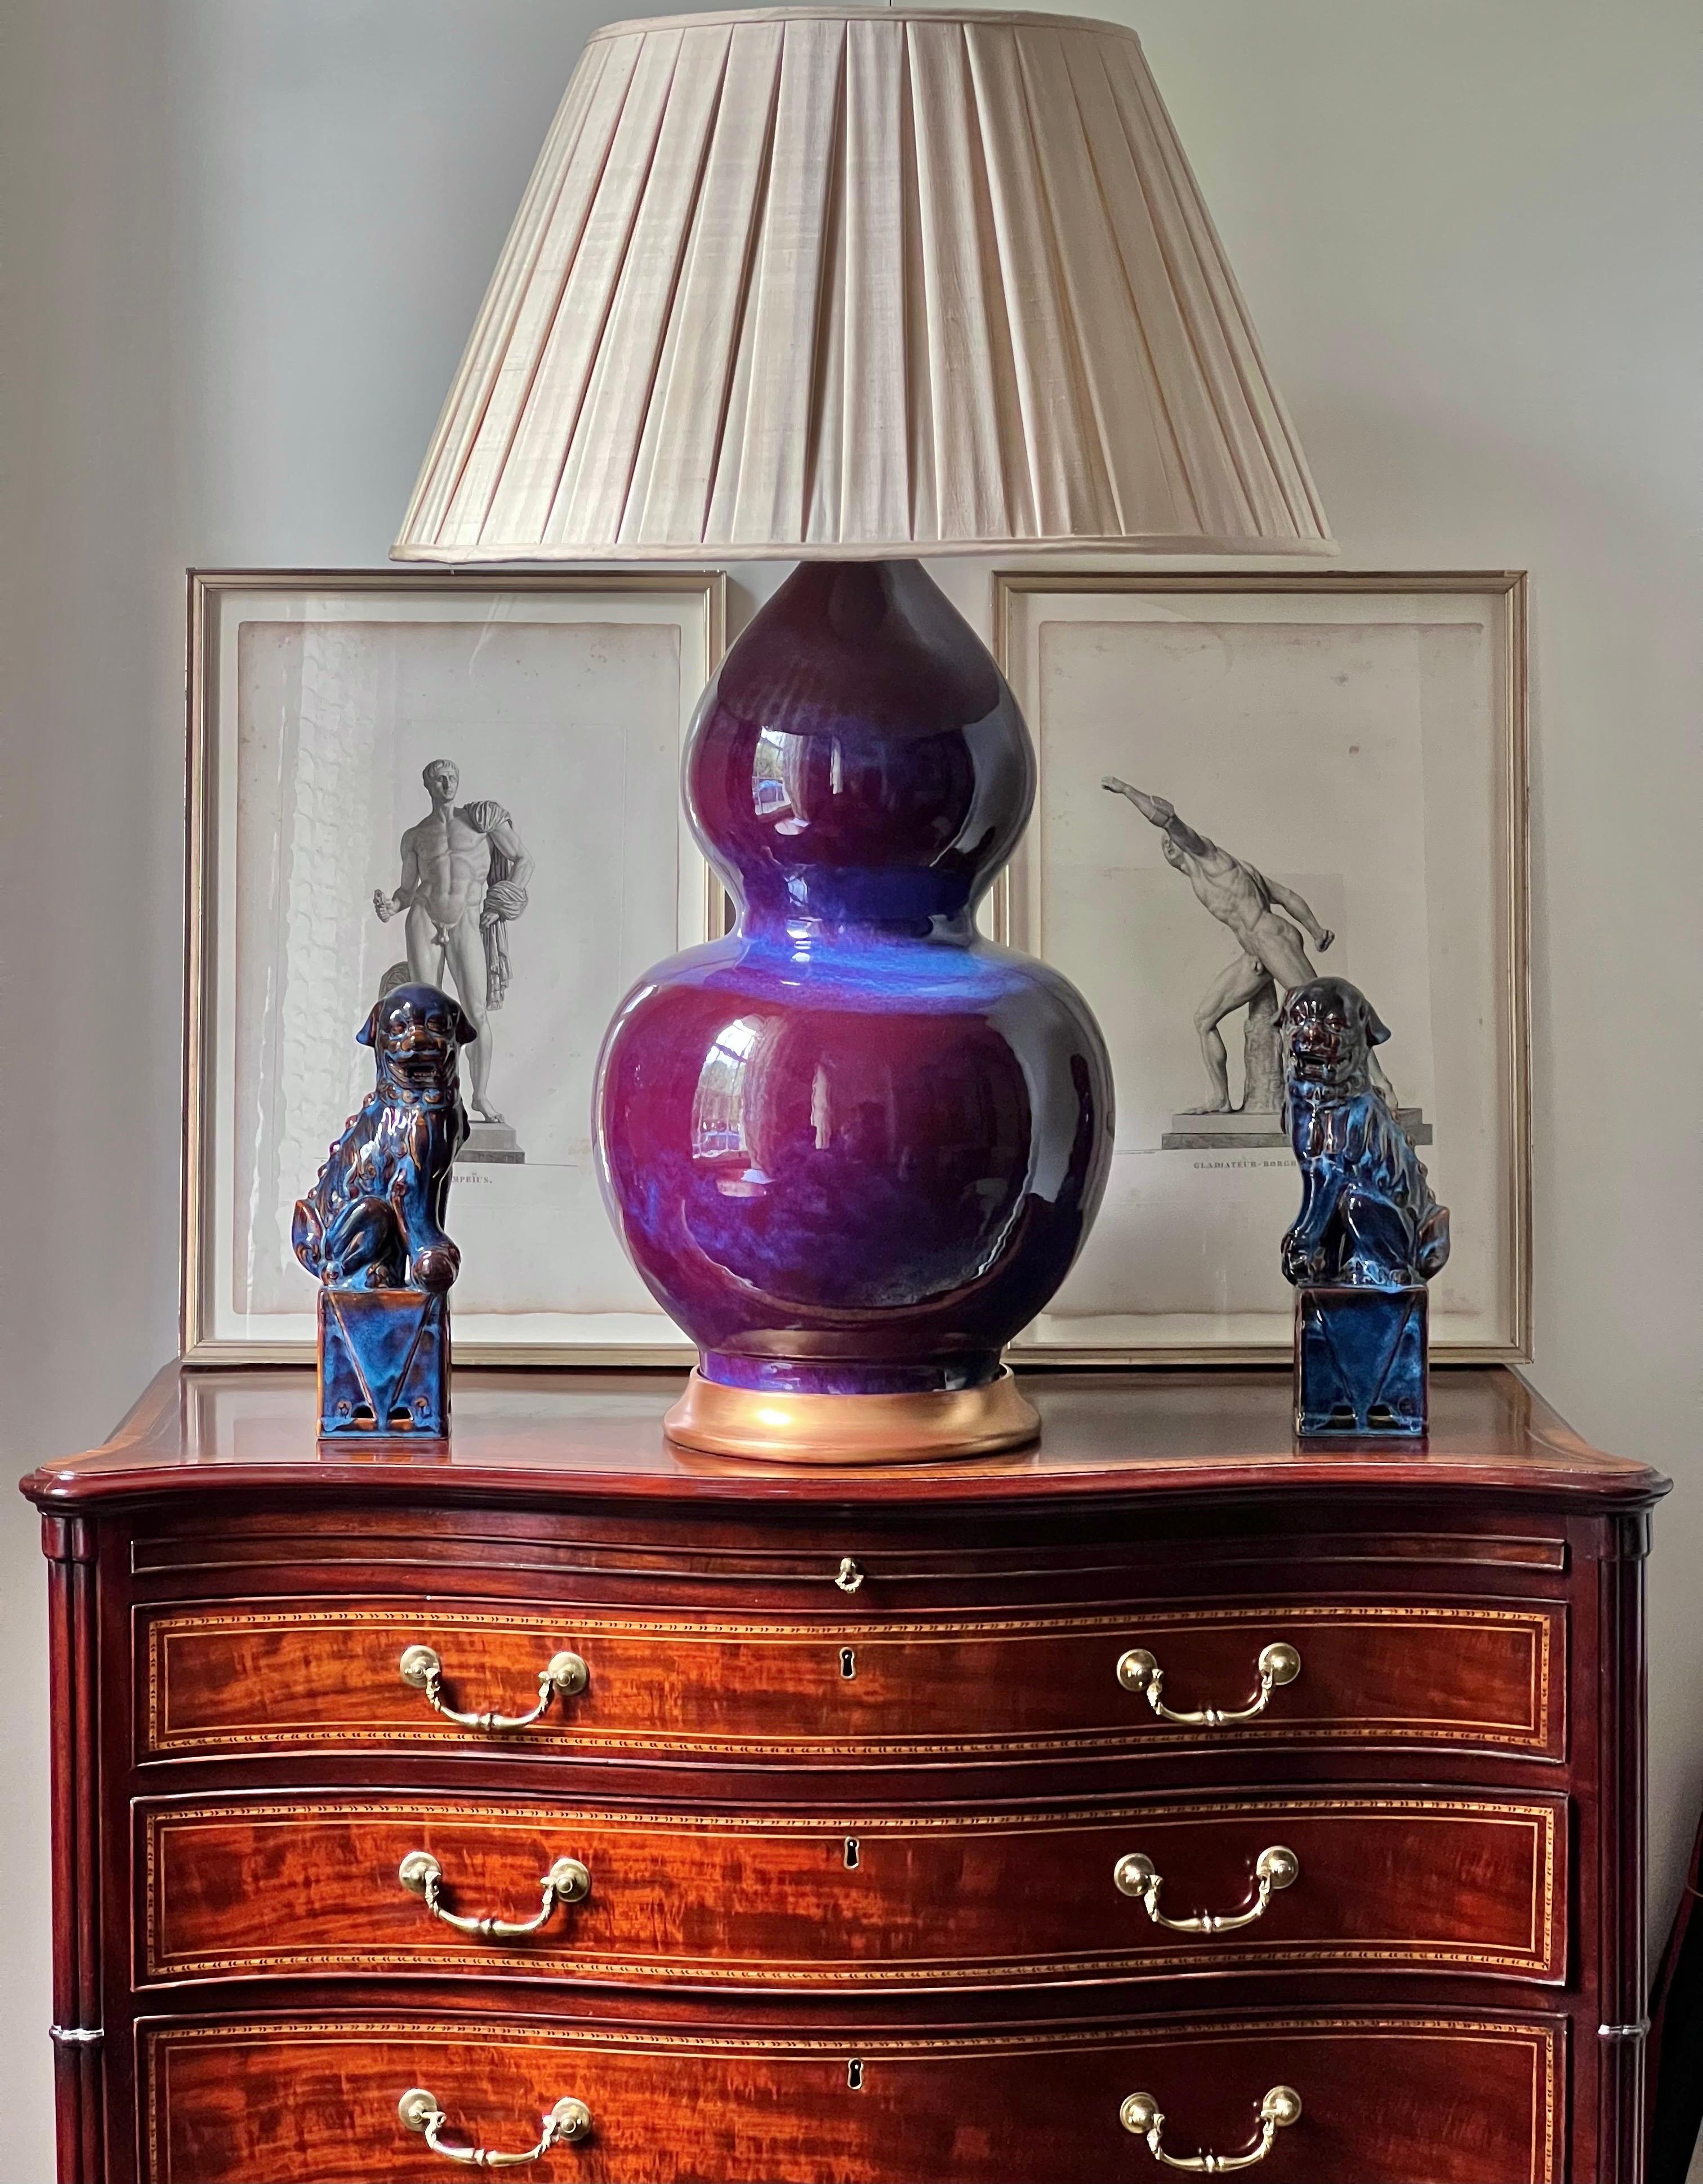 A wonderfully decorative 'double gourd' or huluping vase of massive proportions, beautifully glazed with purple and blue streaks, mounted as lamp.
China, 20th century

Why we like it
We love the opulence of colours and the intricate pattern of the